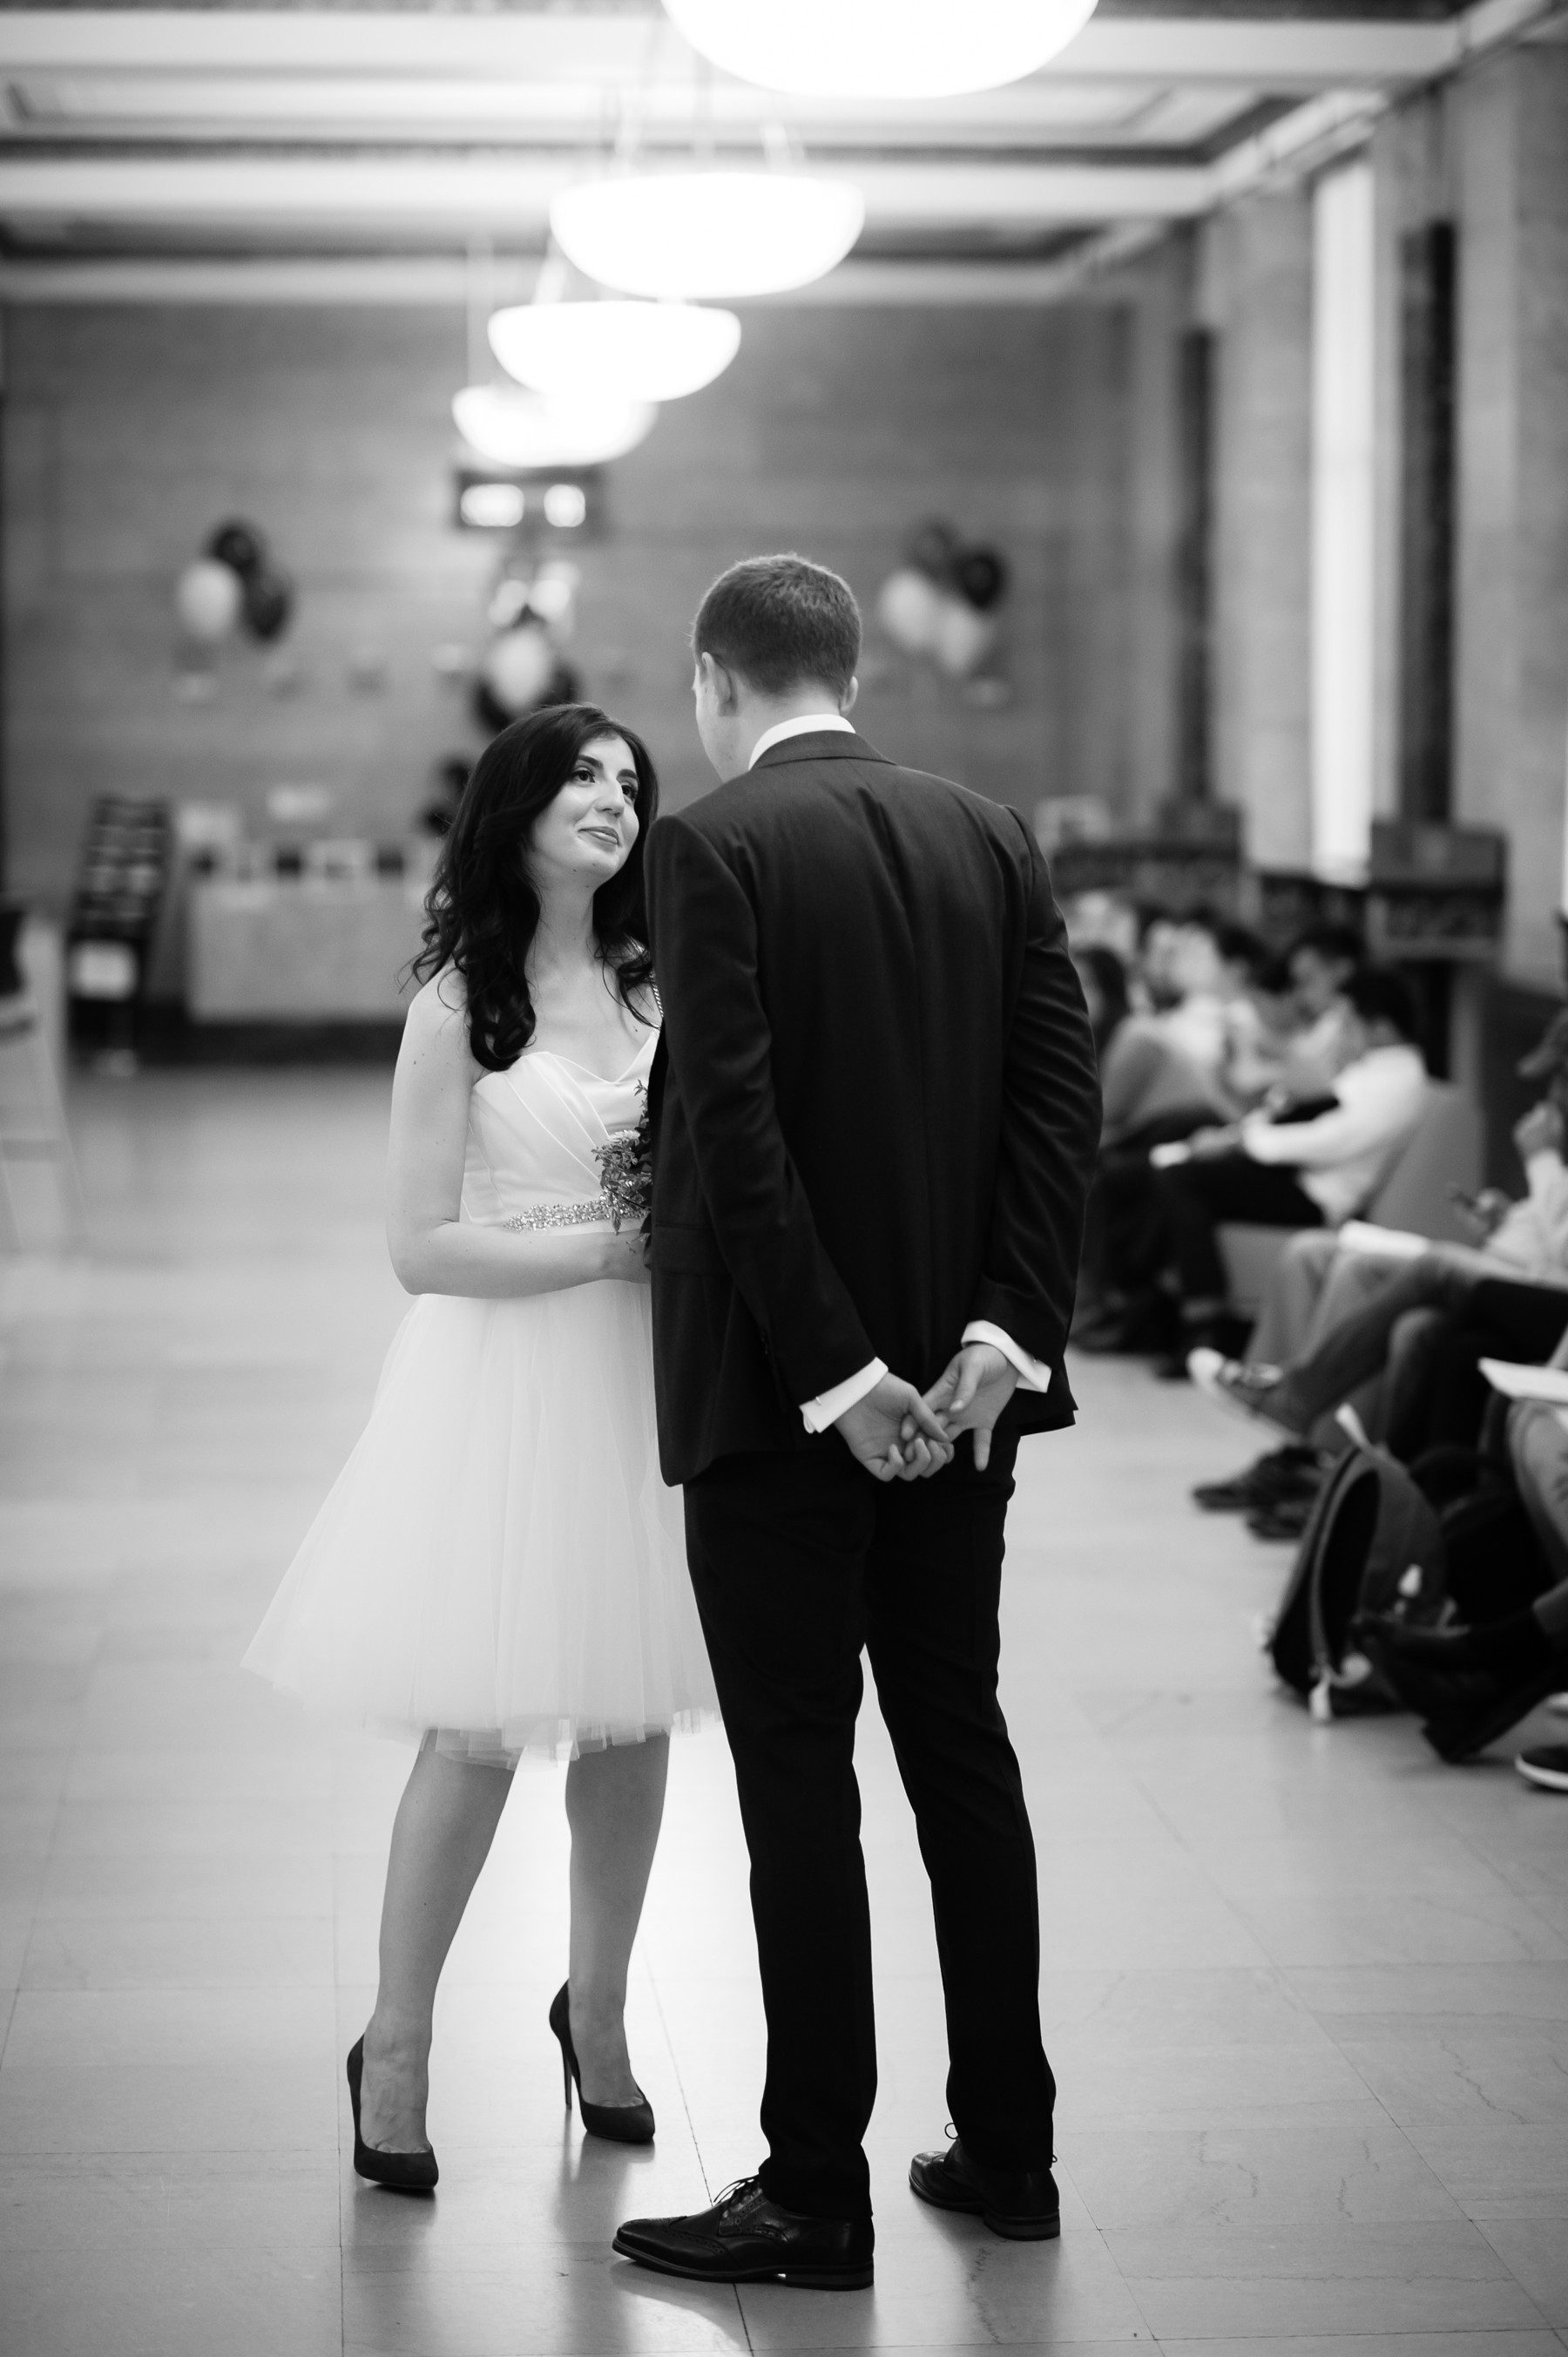 getting married at city hall new york